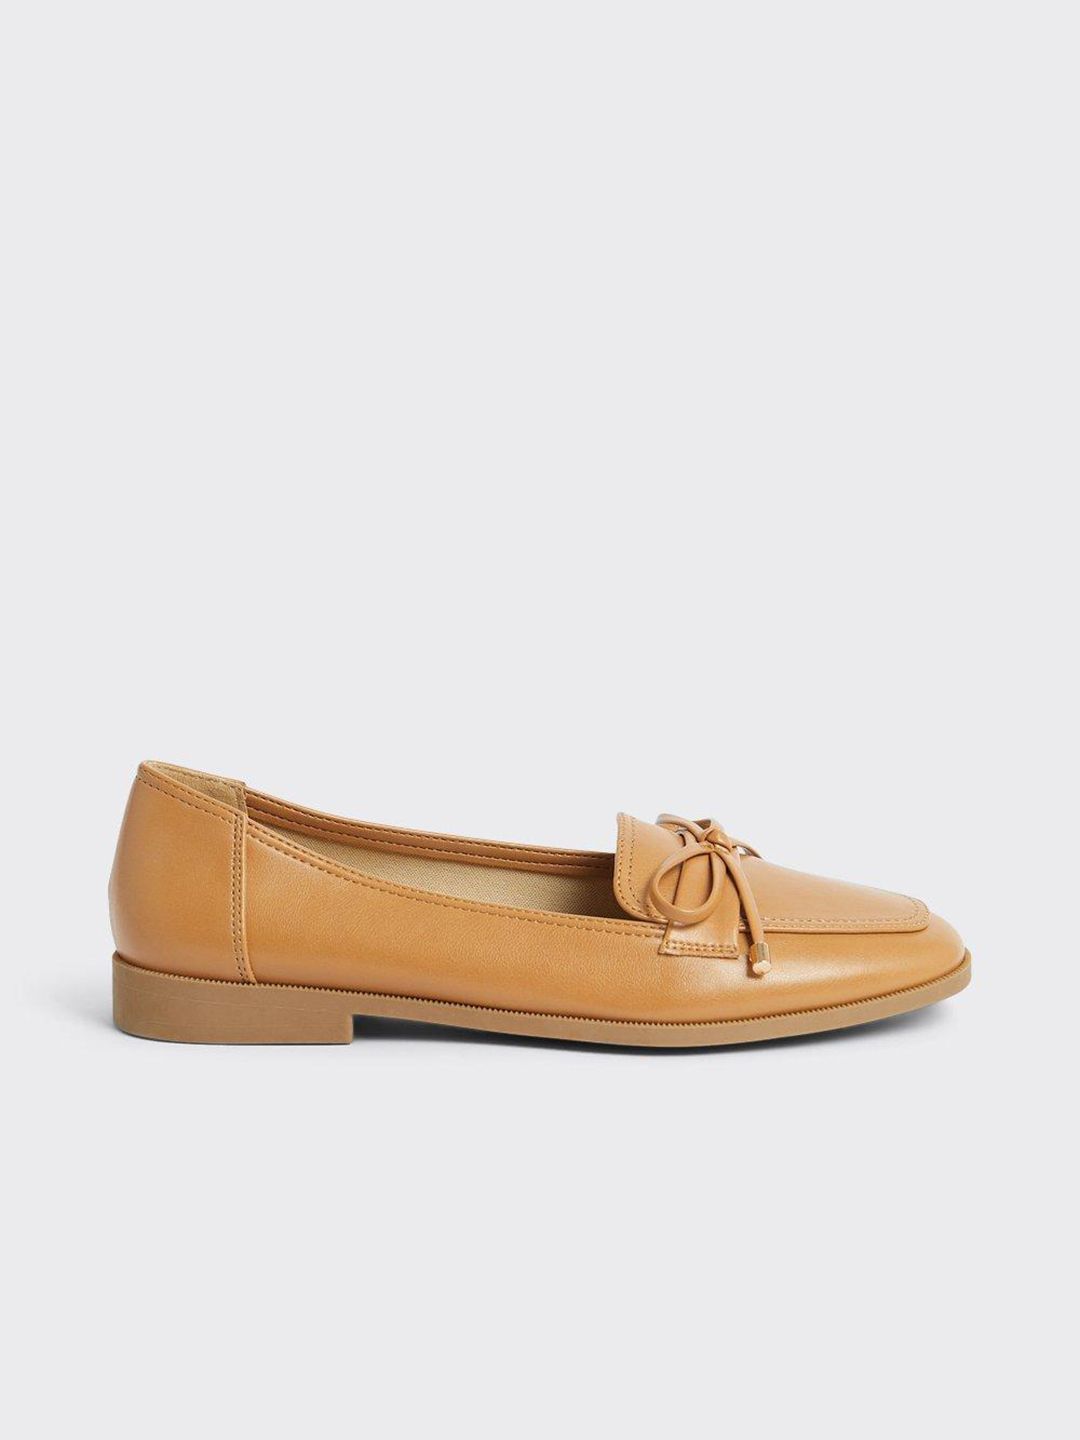 DOROTHY PERKINS Women Tan Bow Detail Loafers Price in India